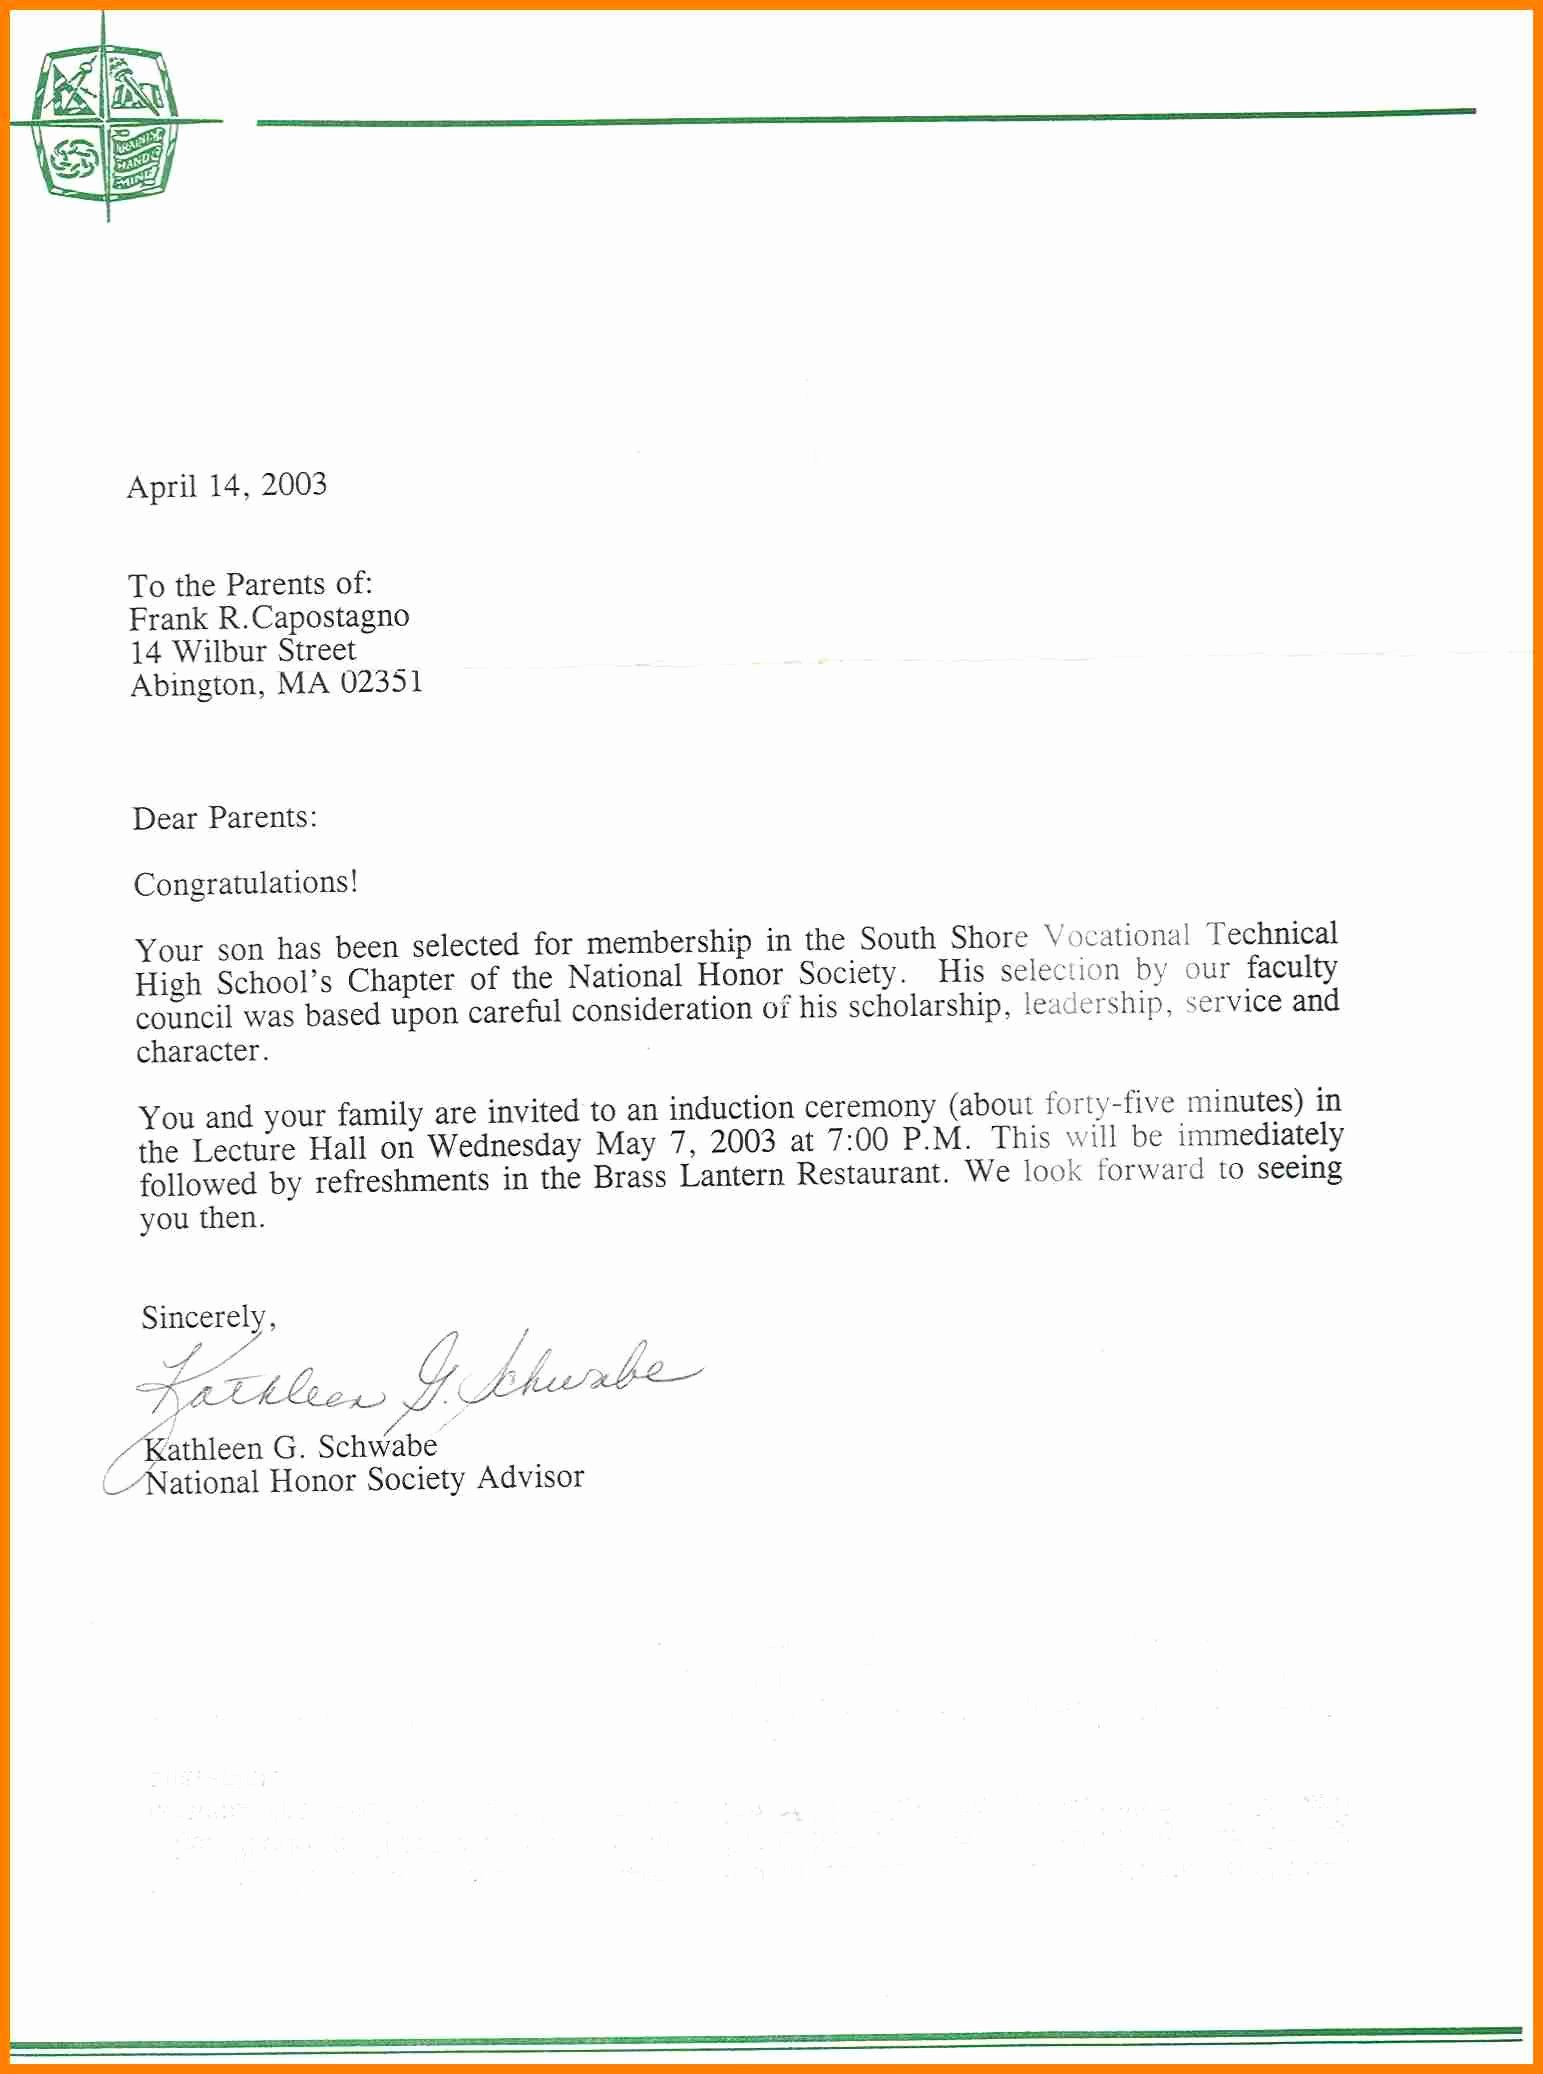 Nhs Letter Of Recommendation Sample Luxury 12 Re Mendation Letter for National Honor society